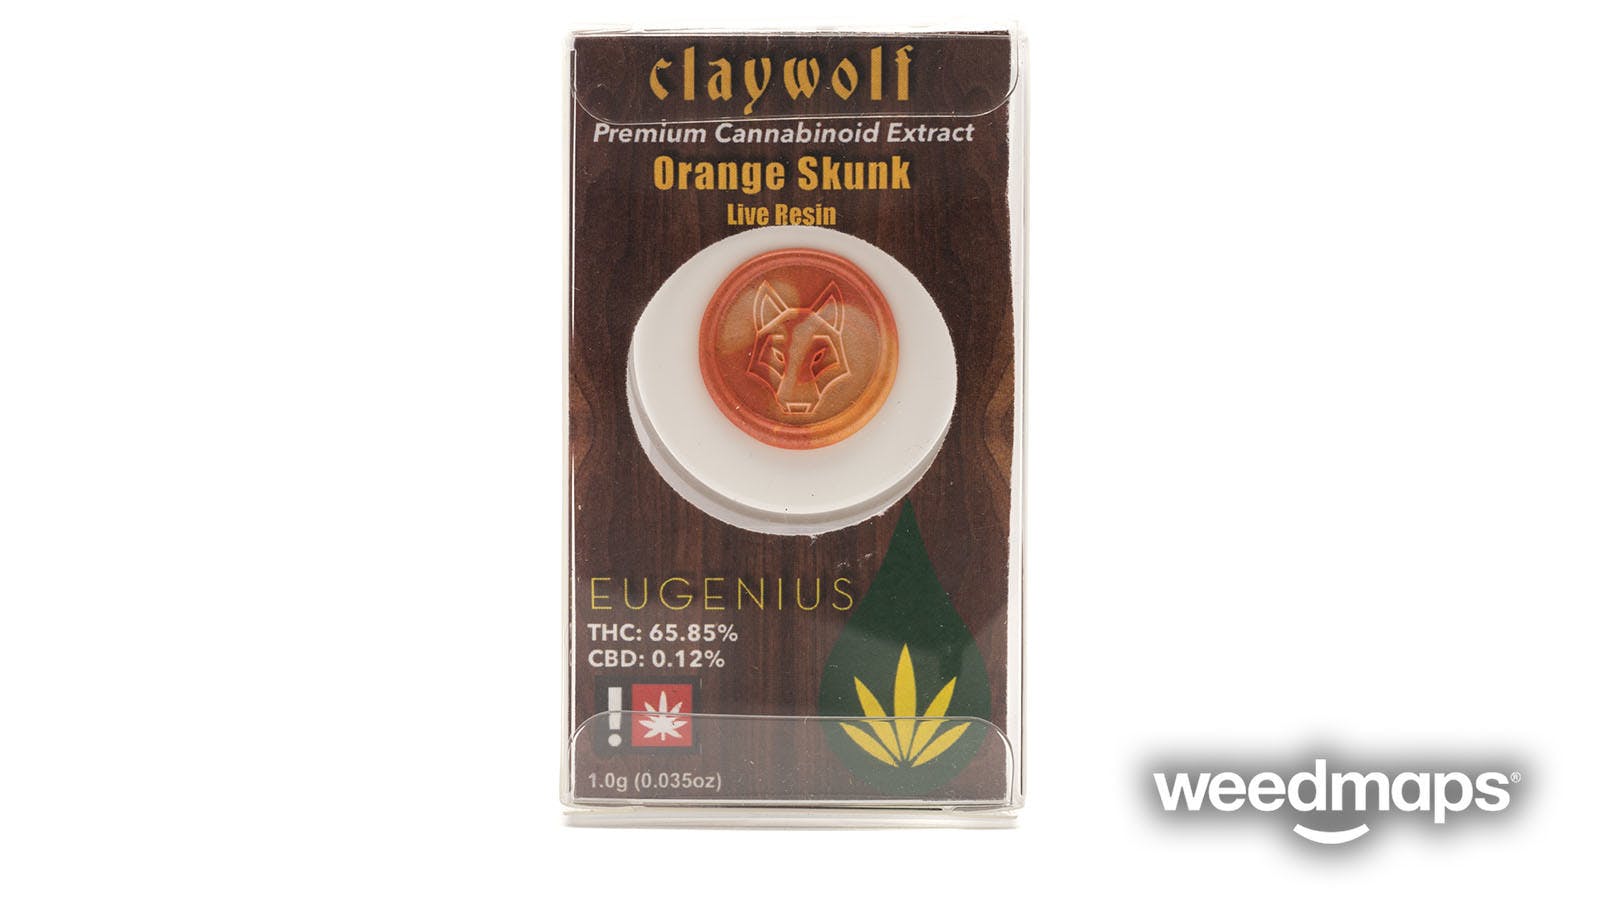 concentrate-clay-wolf-orange-skunk-live-resin